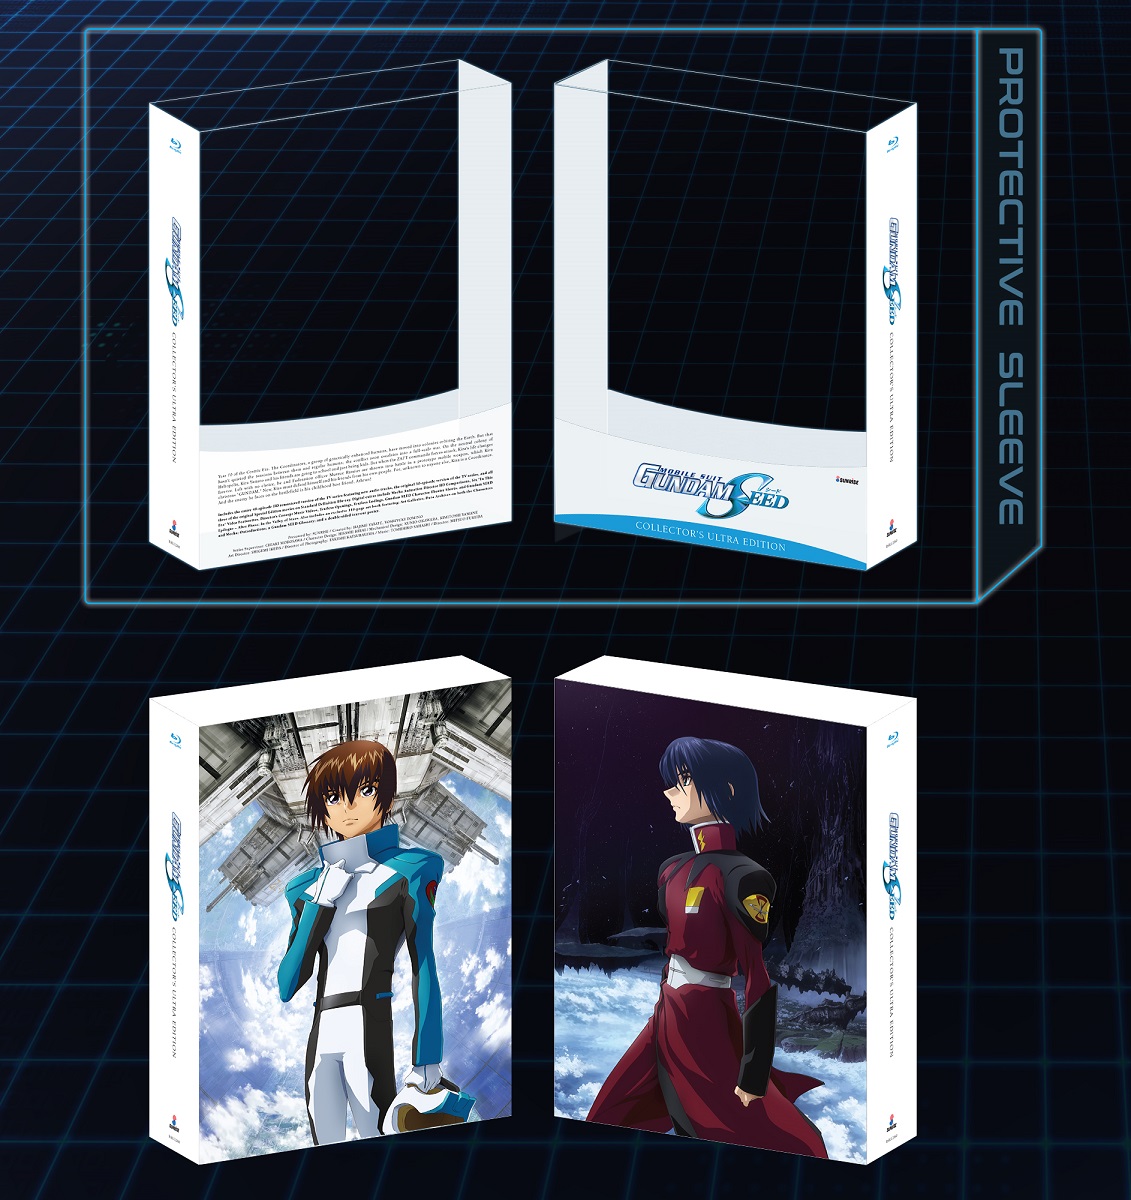 Mobile Suit Gundam SEED Collector's Ultra Edition Blu-ray image count 3